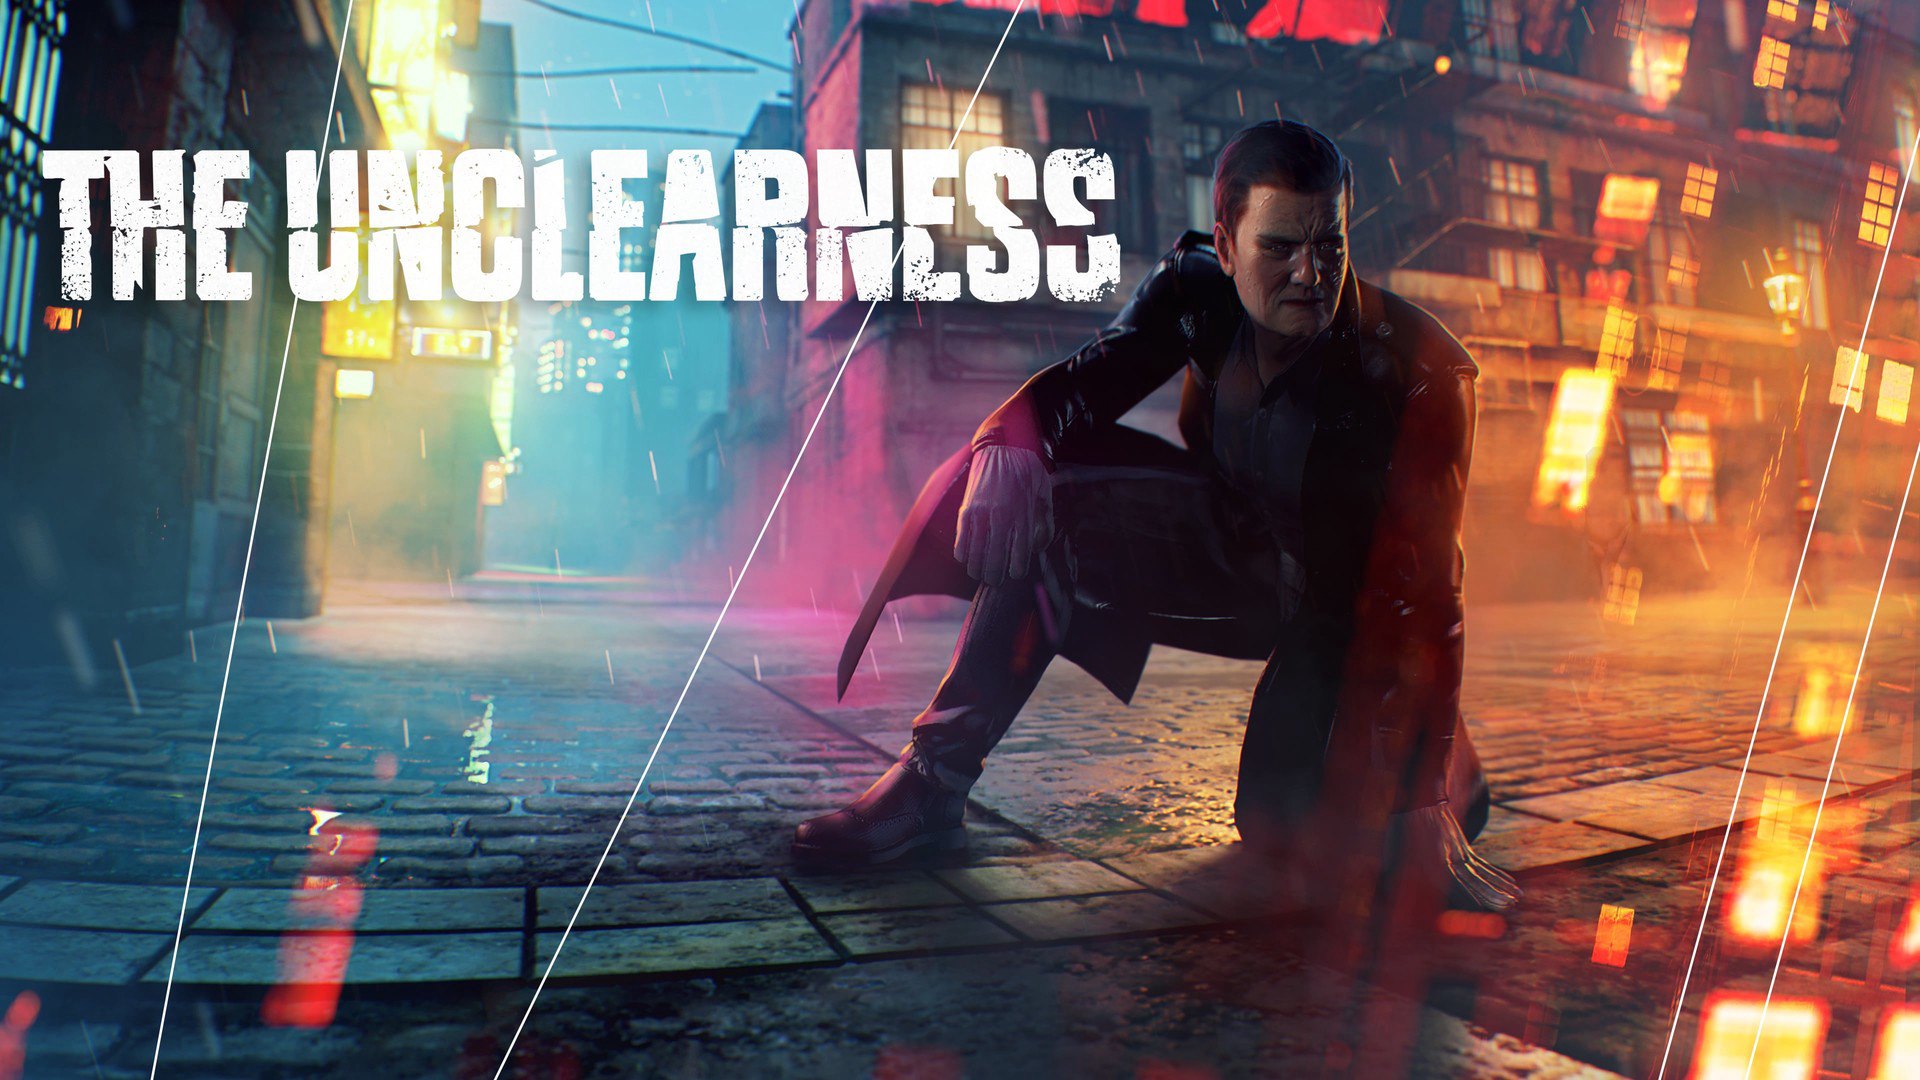 THE UNCLEARNESS Steam CD Key 6.77 USD